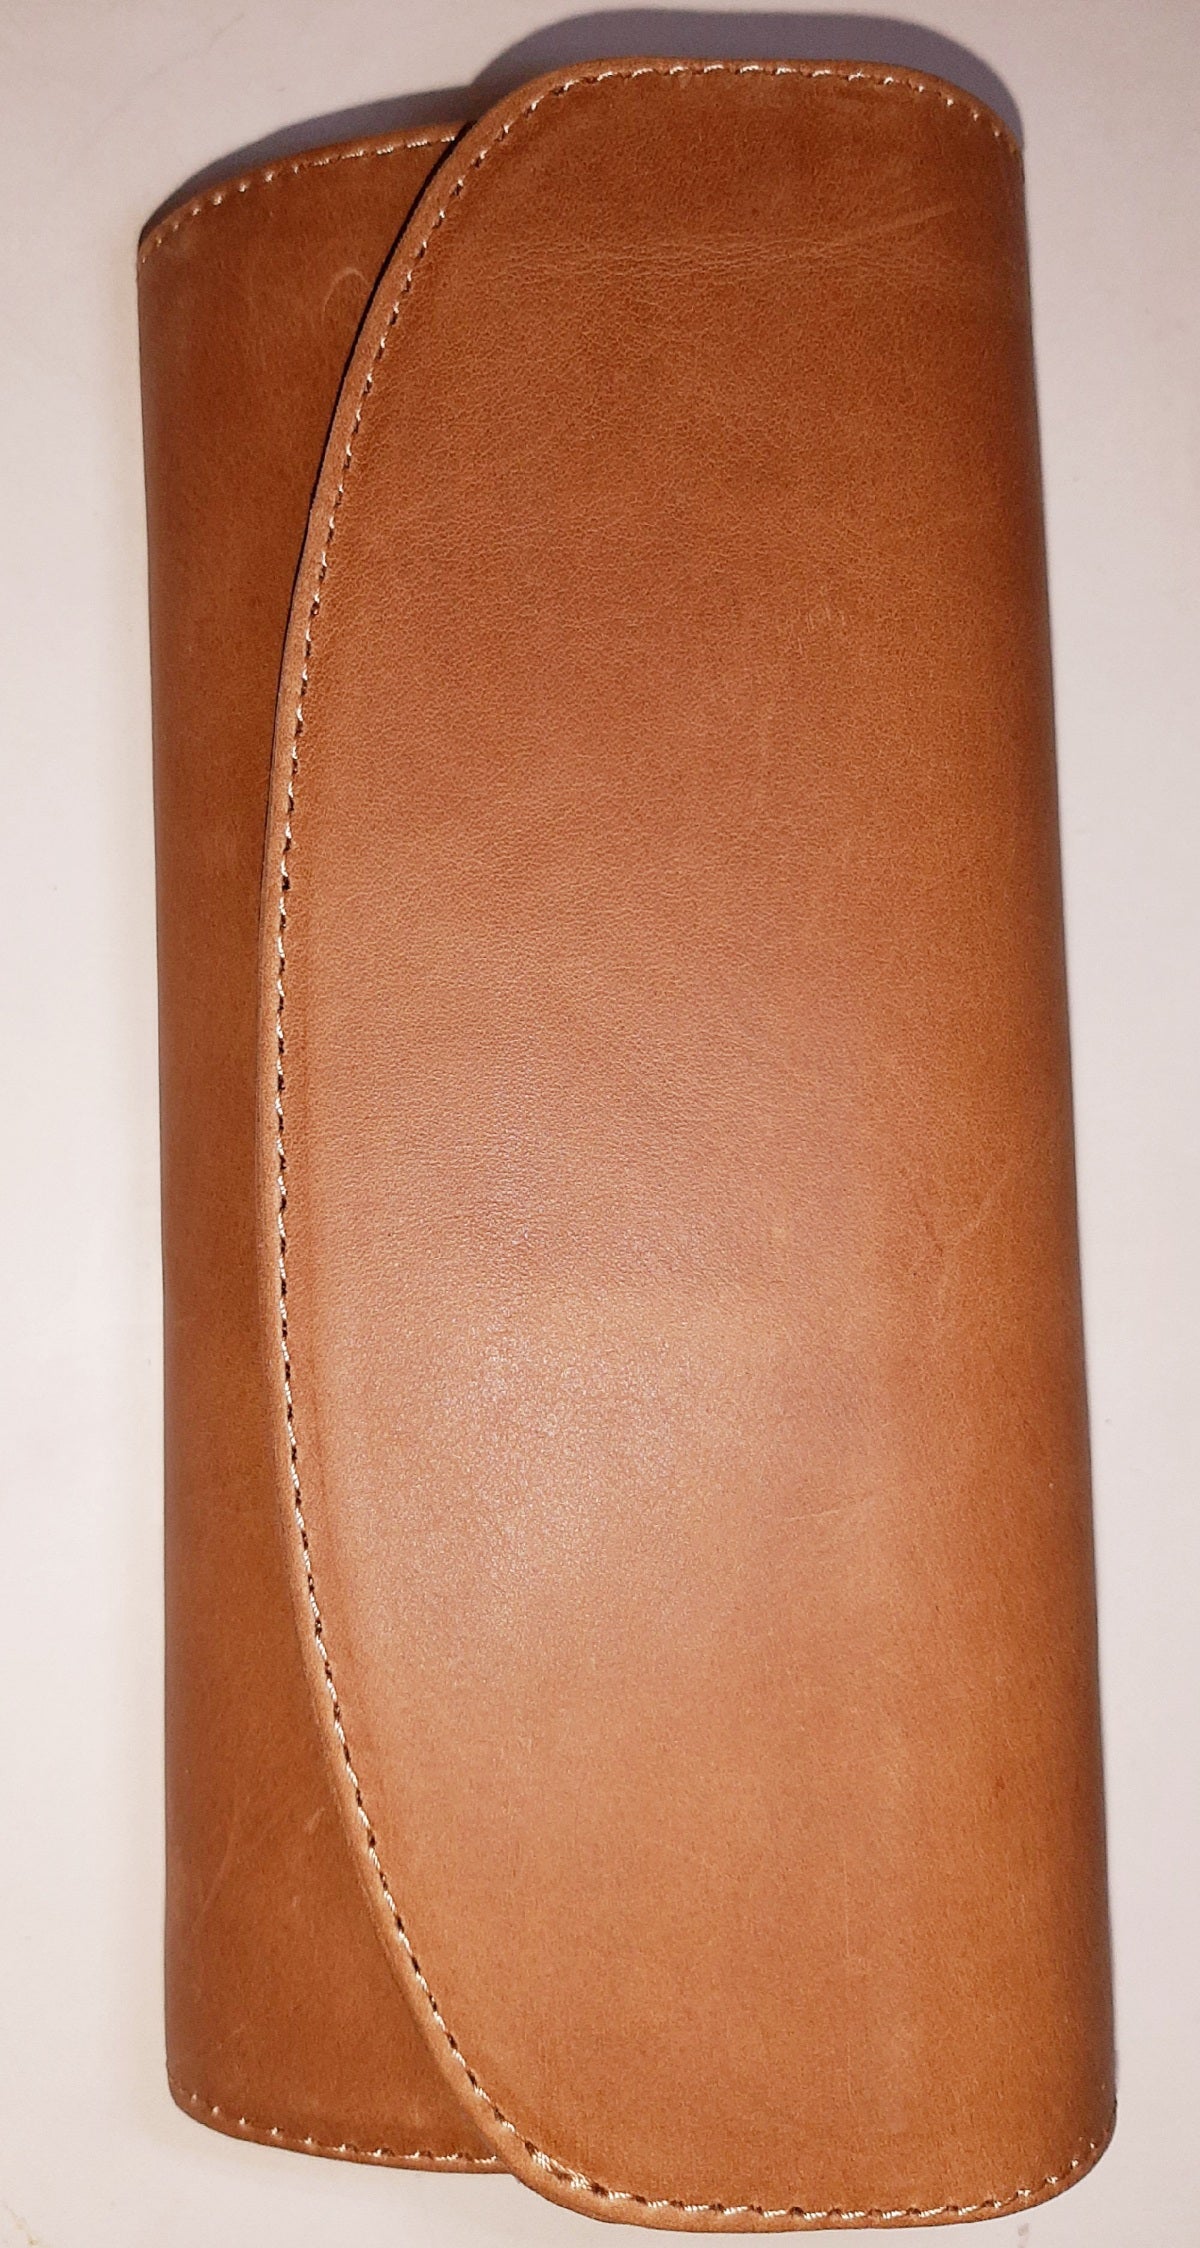 Ladies leather wallets in toffee vintage tan colour